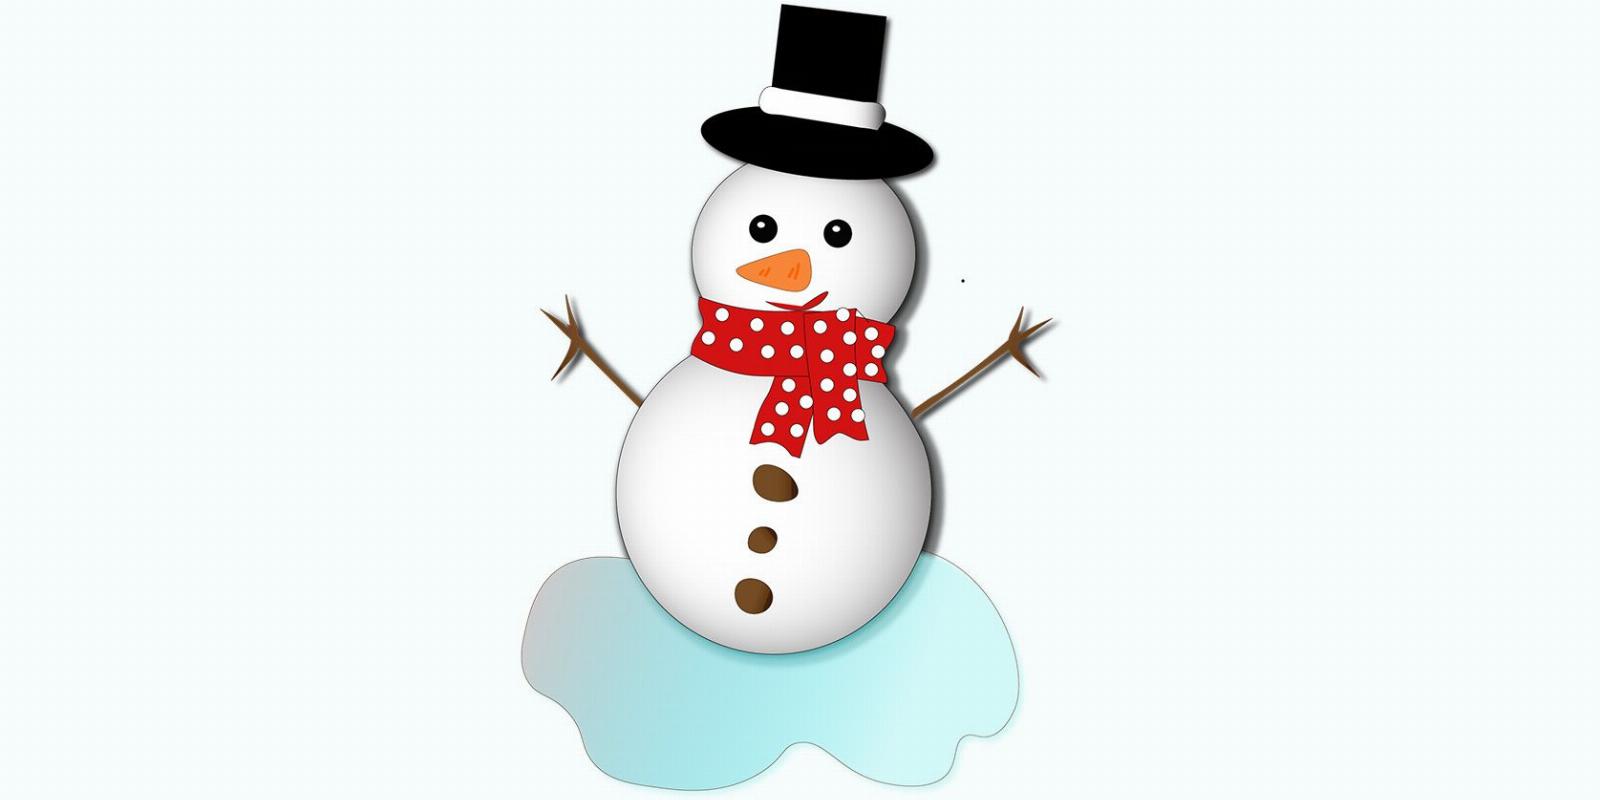 How to Build a Snowman in Adobe Illustrator